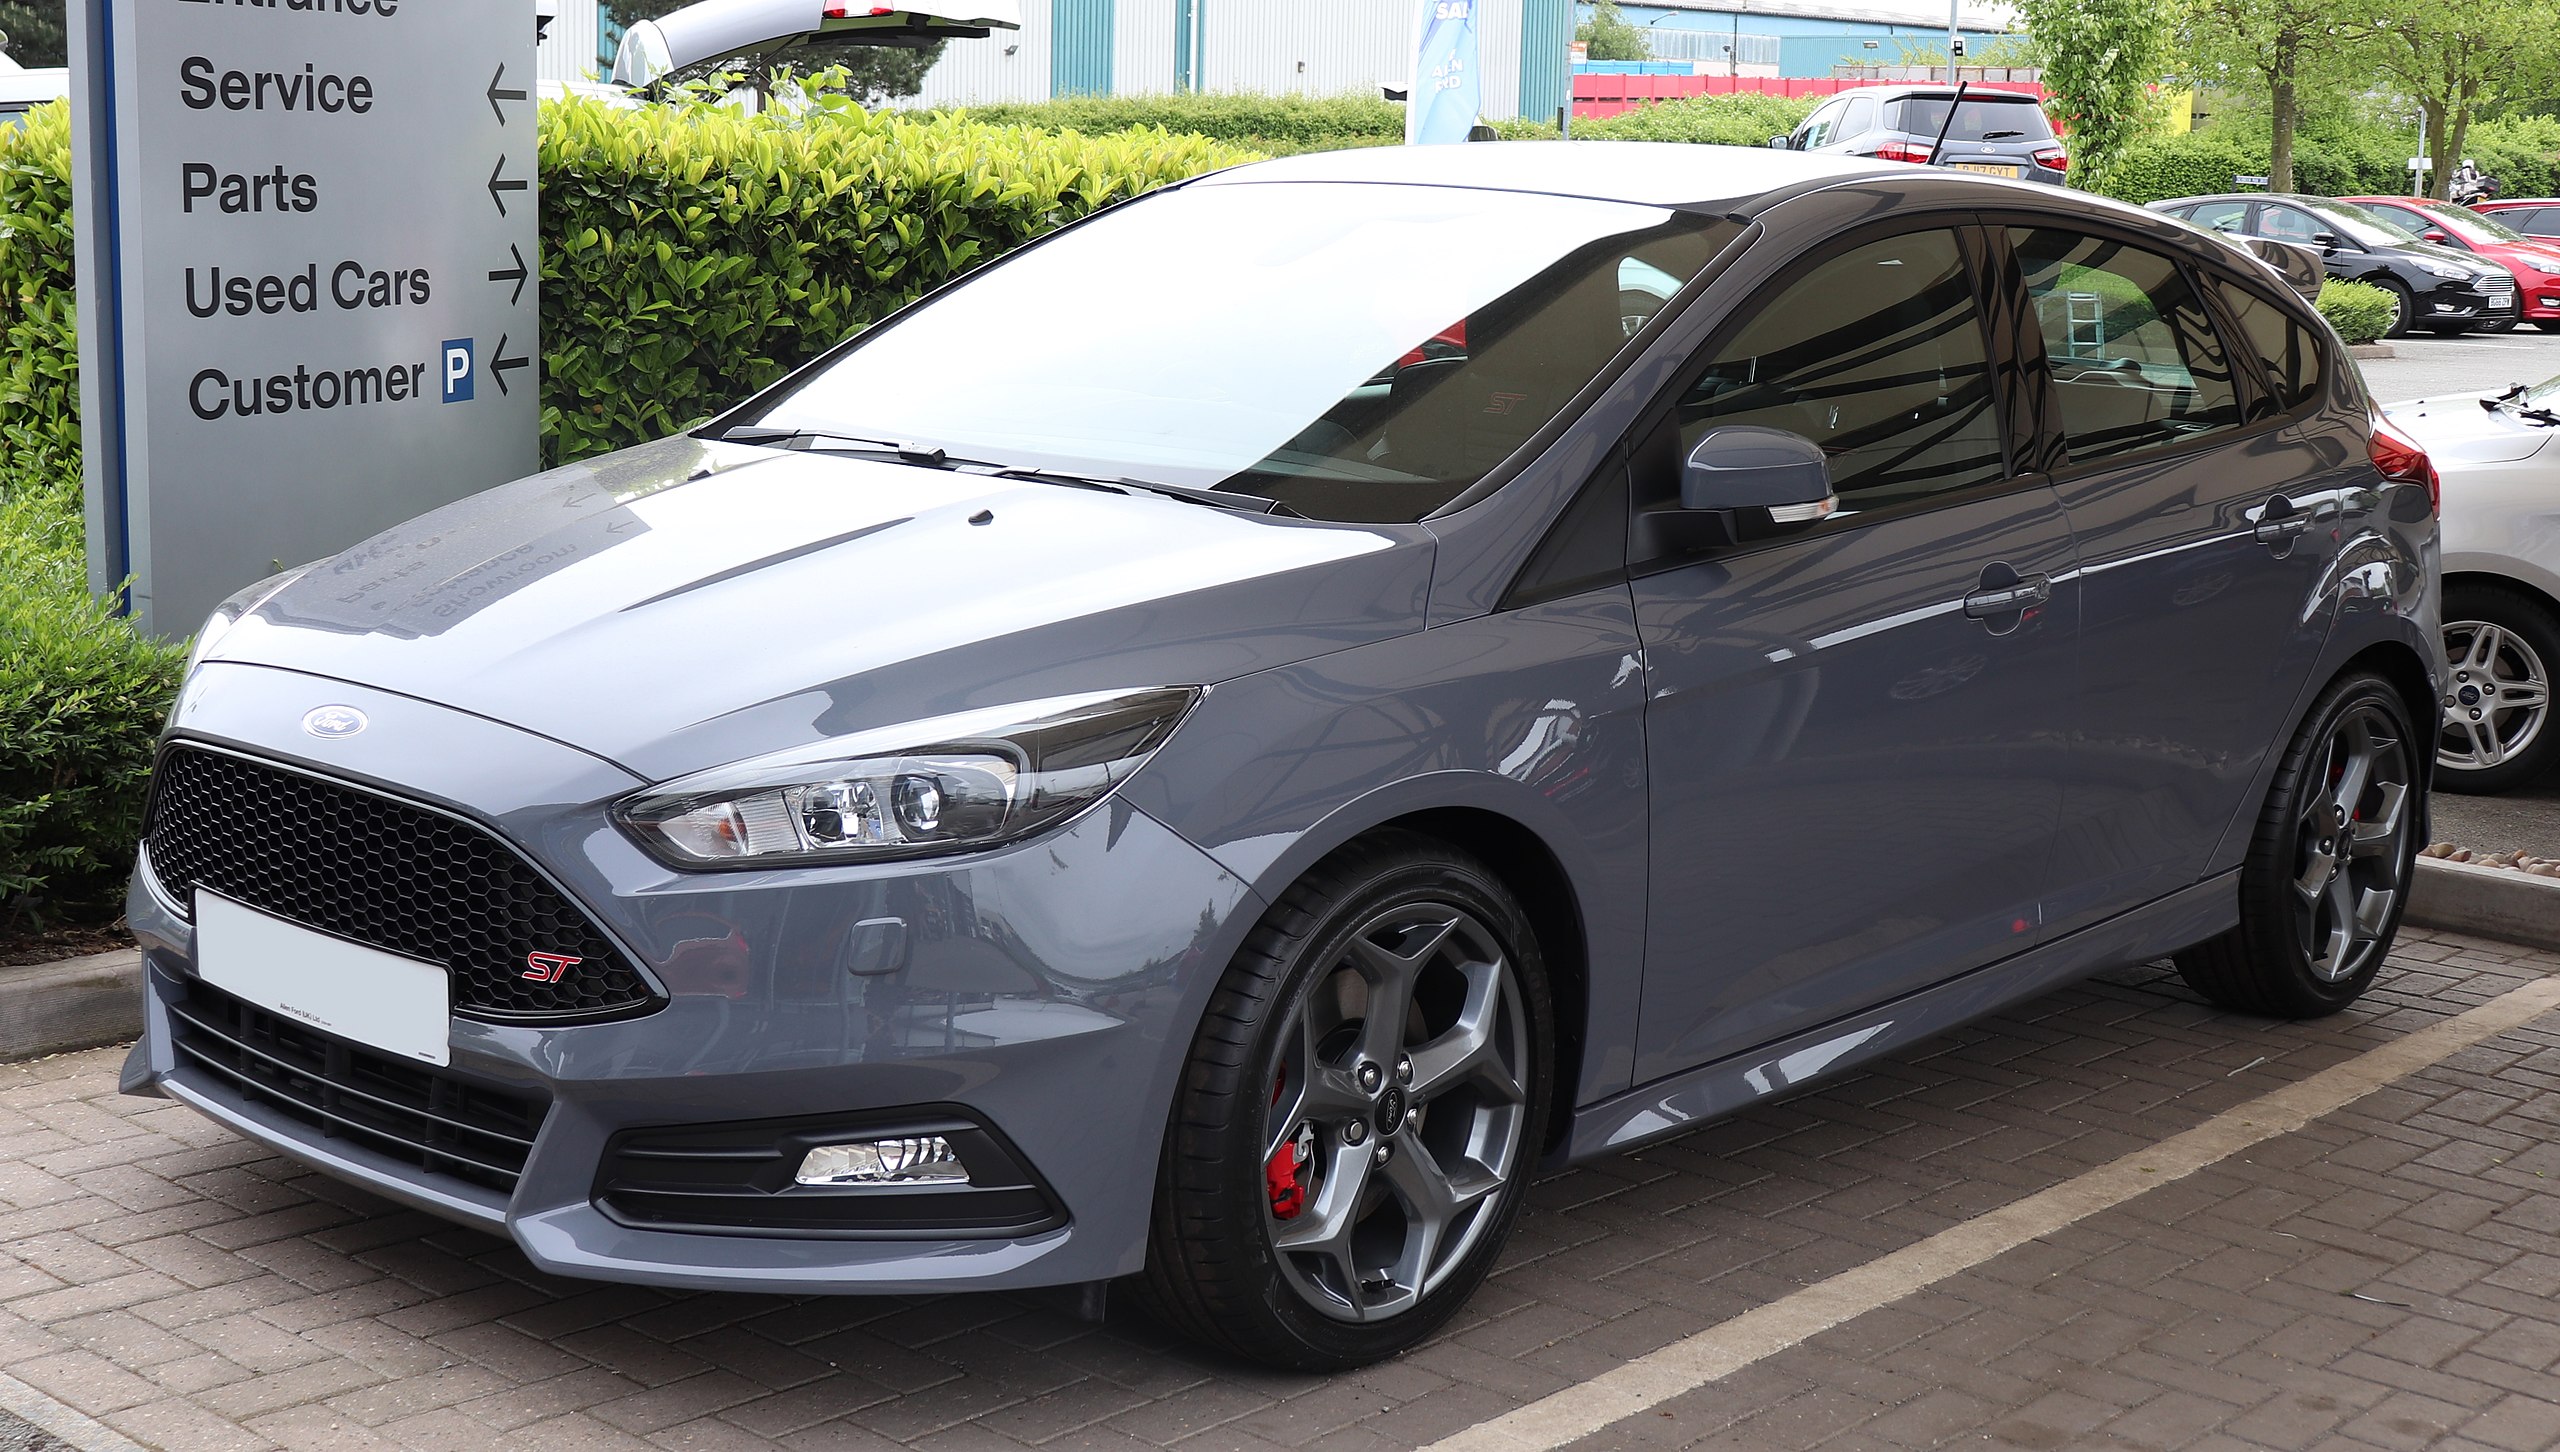 File:2018 Ford Focus ST-3 TDCi Automatic 2.0.jpg - Wikimedia Commons